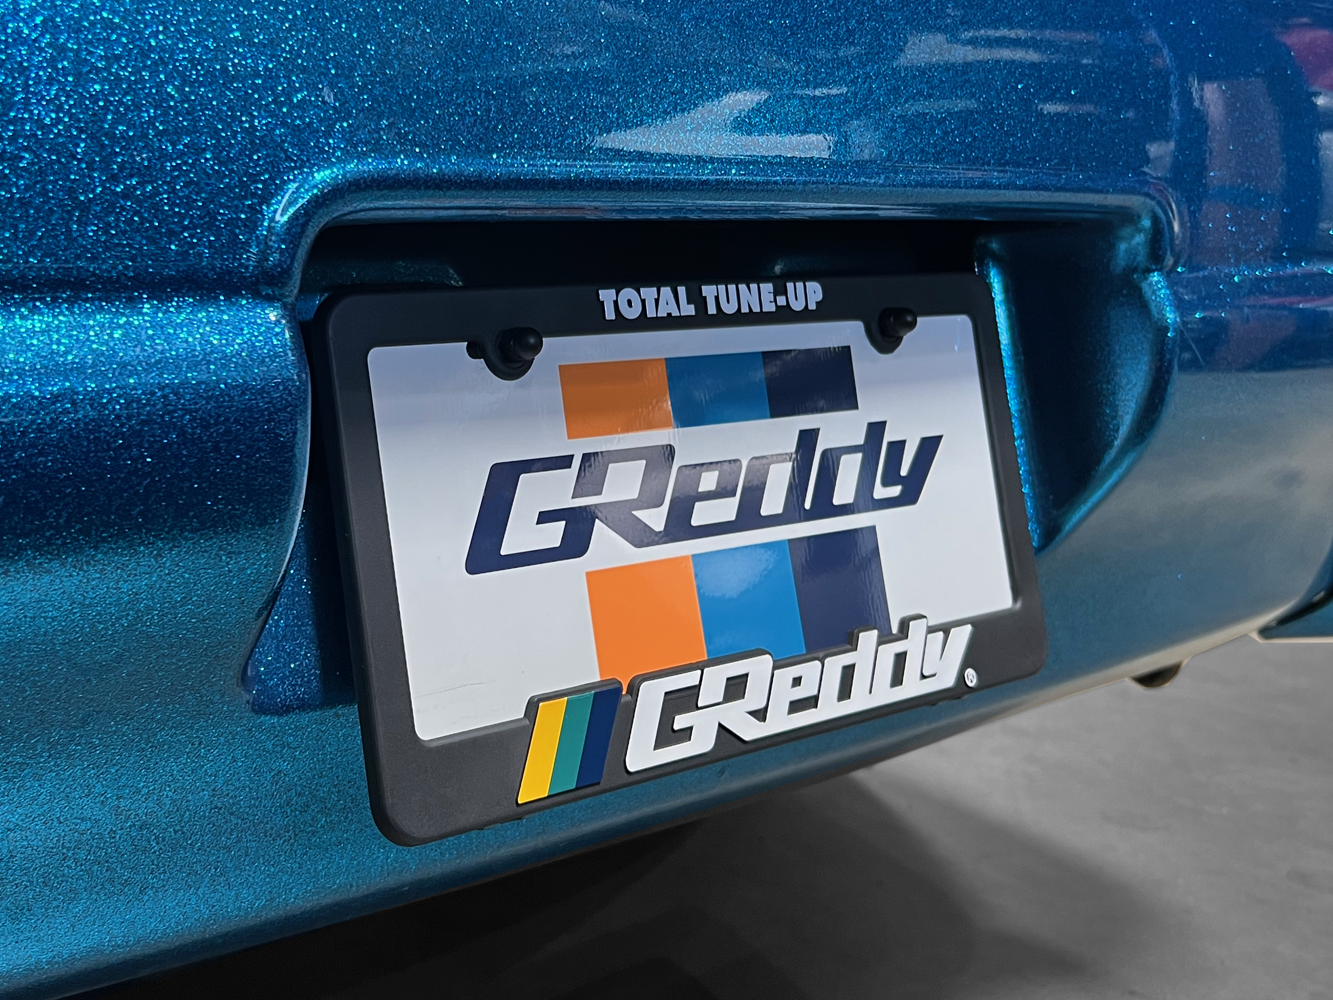 GReddy Total Tune Up  License Plate Frame - "Black-out" or "Color"